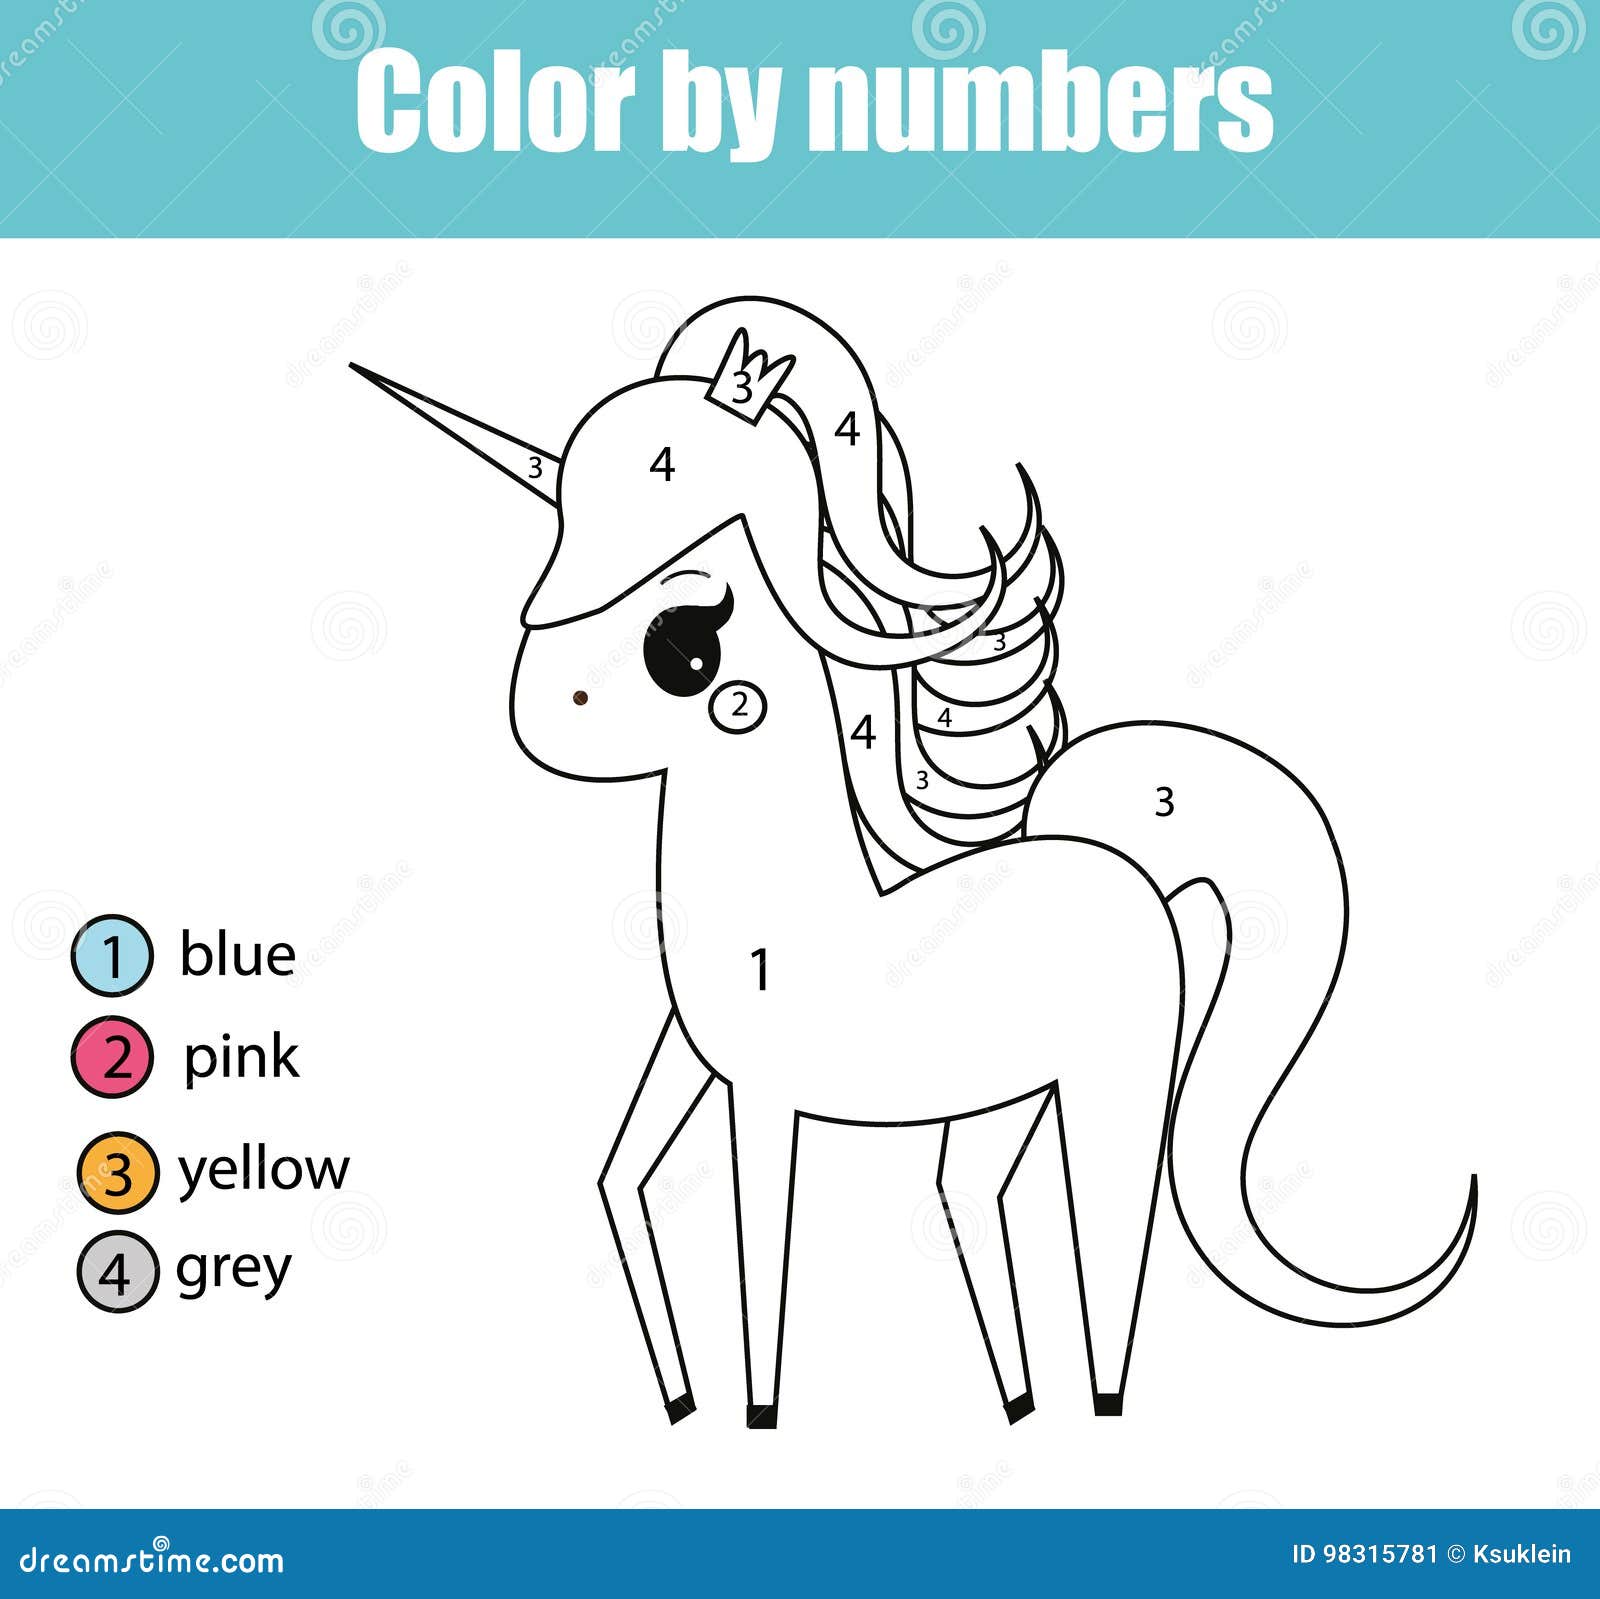 Coloring page with unicorn character color by numbers educational children game drawing kids activity stock vector